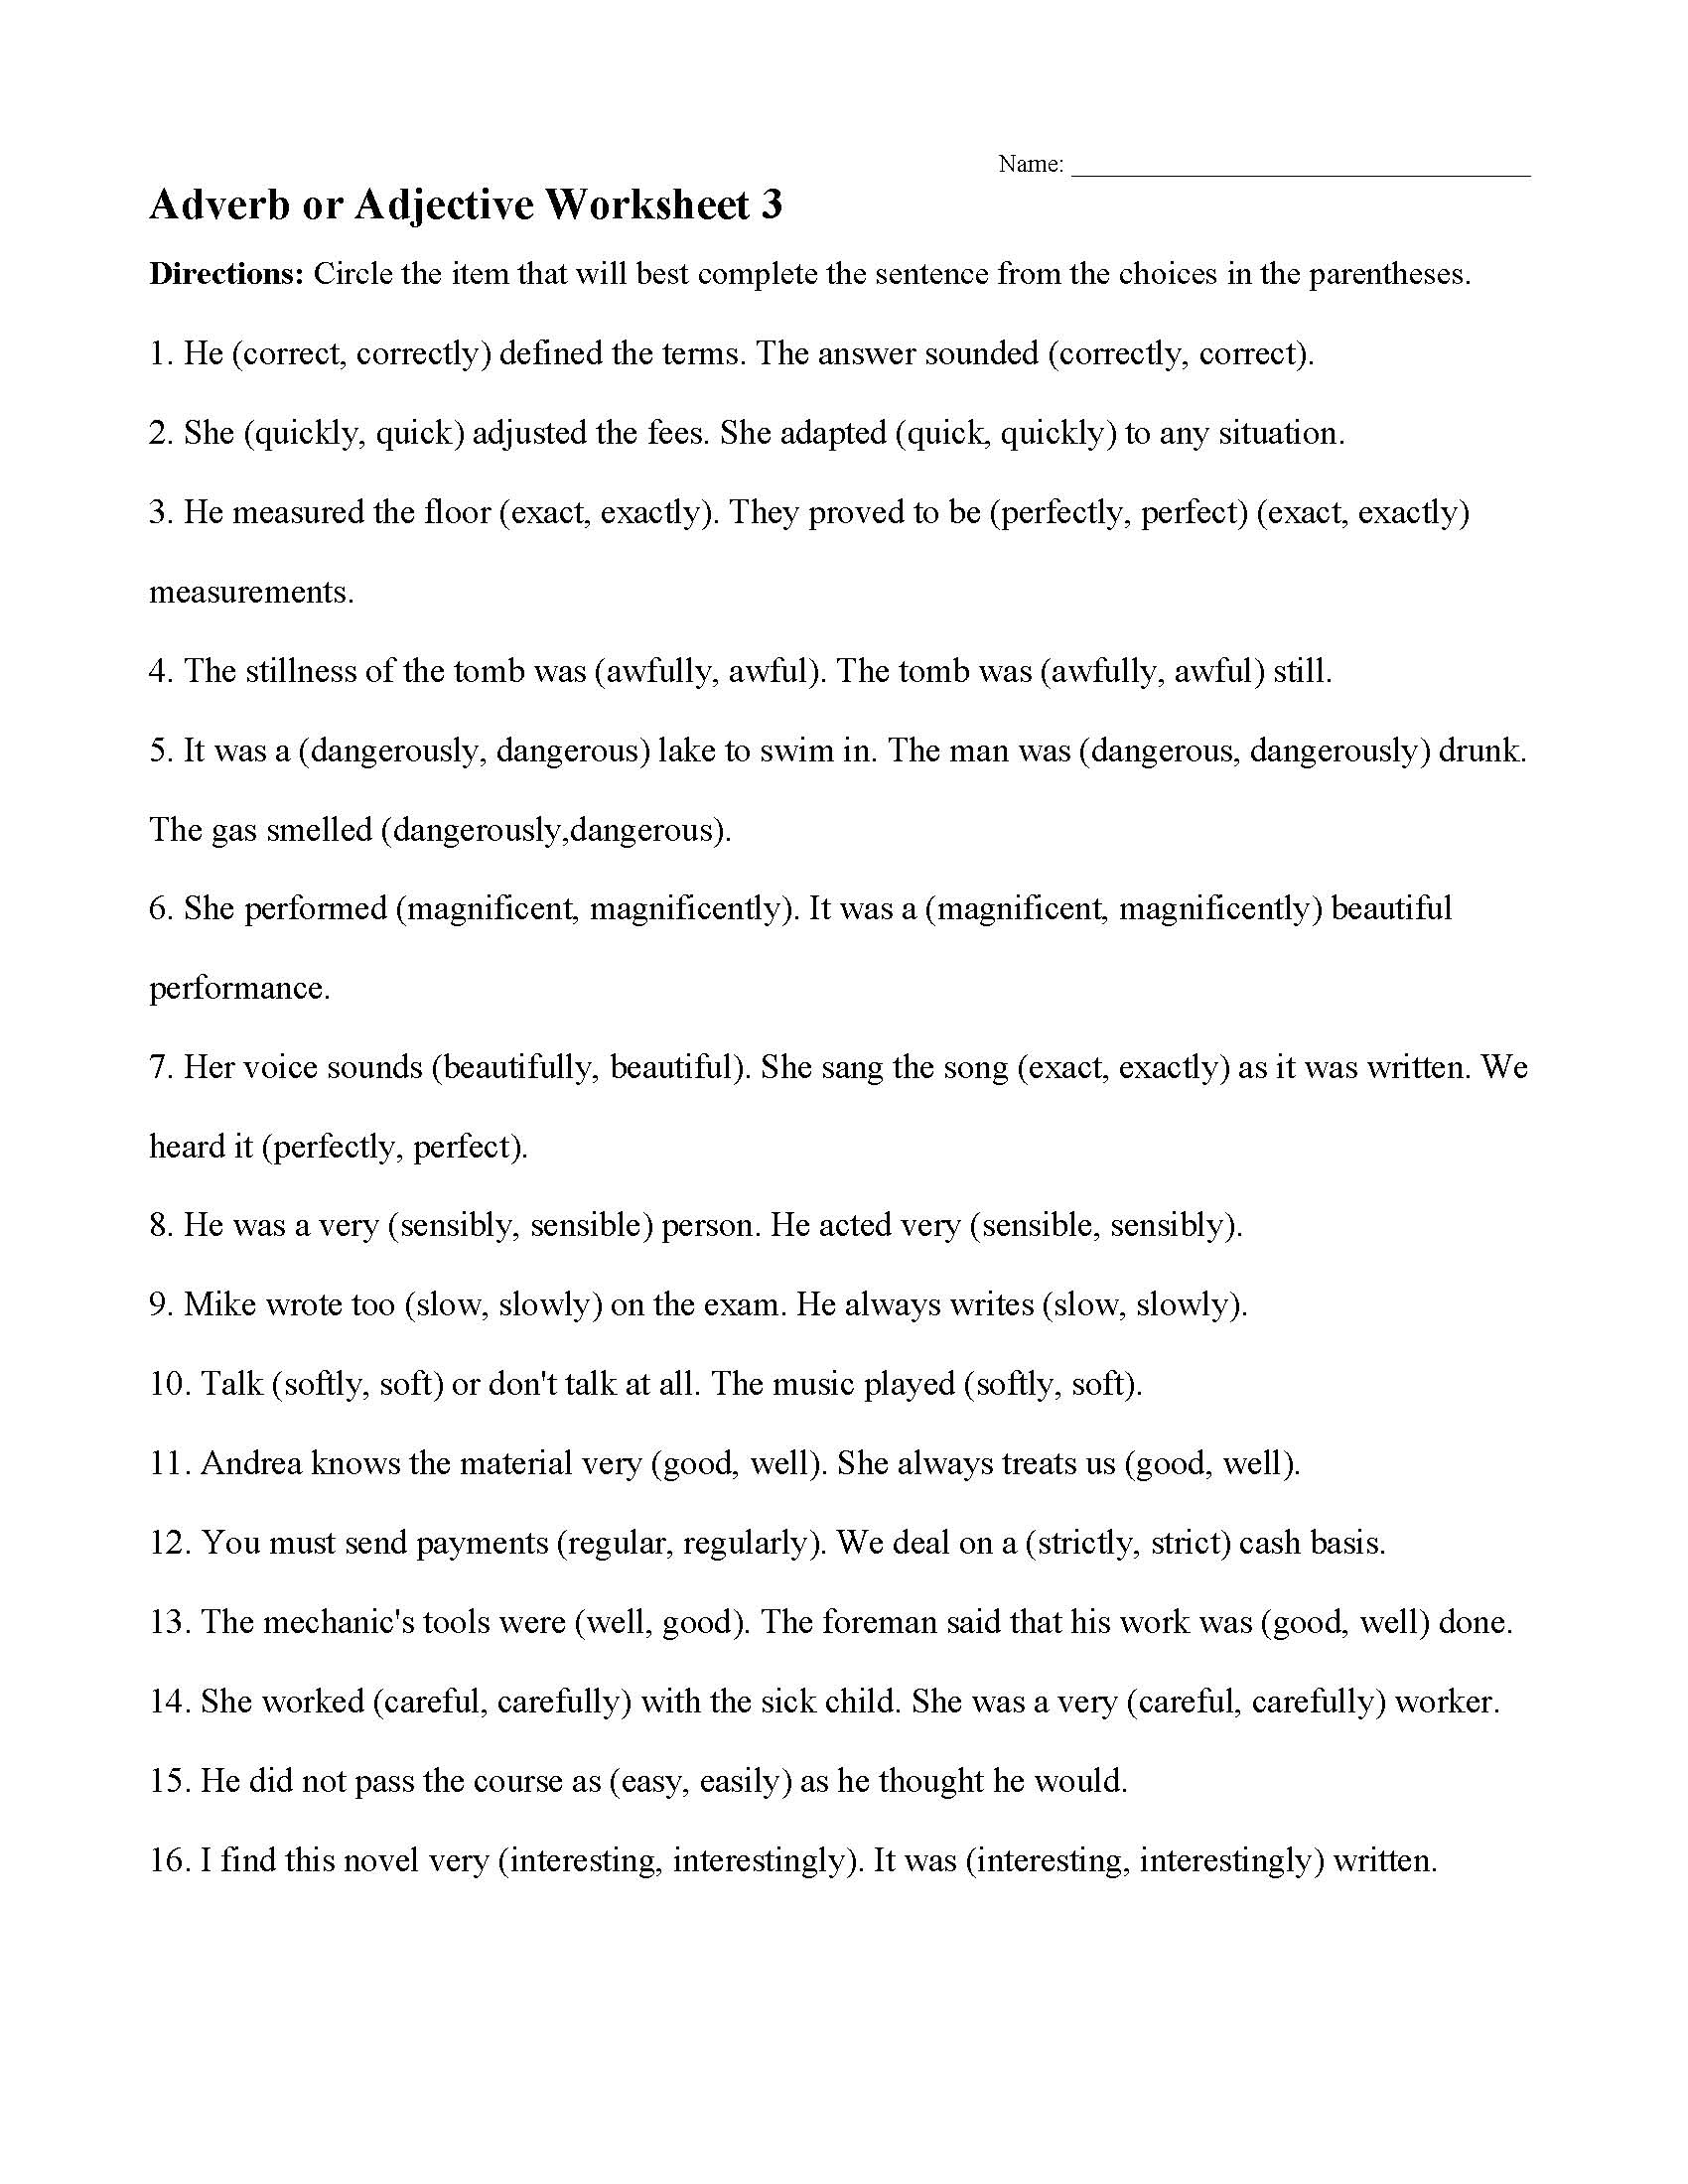 Adverbs And Adjectives Worksheet 3 Preview